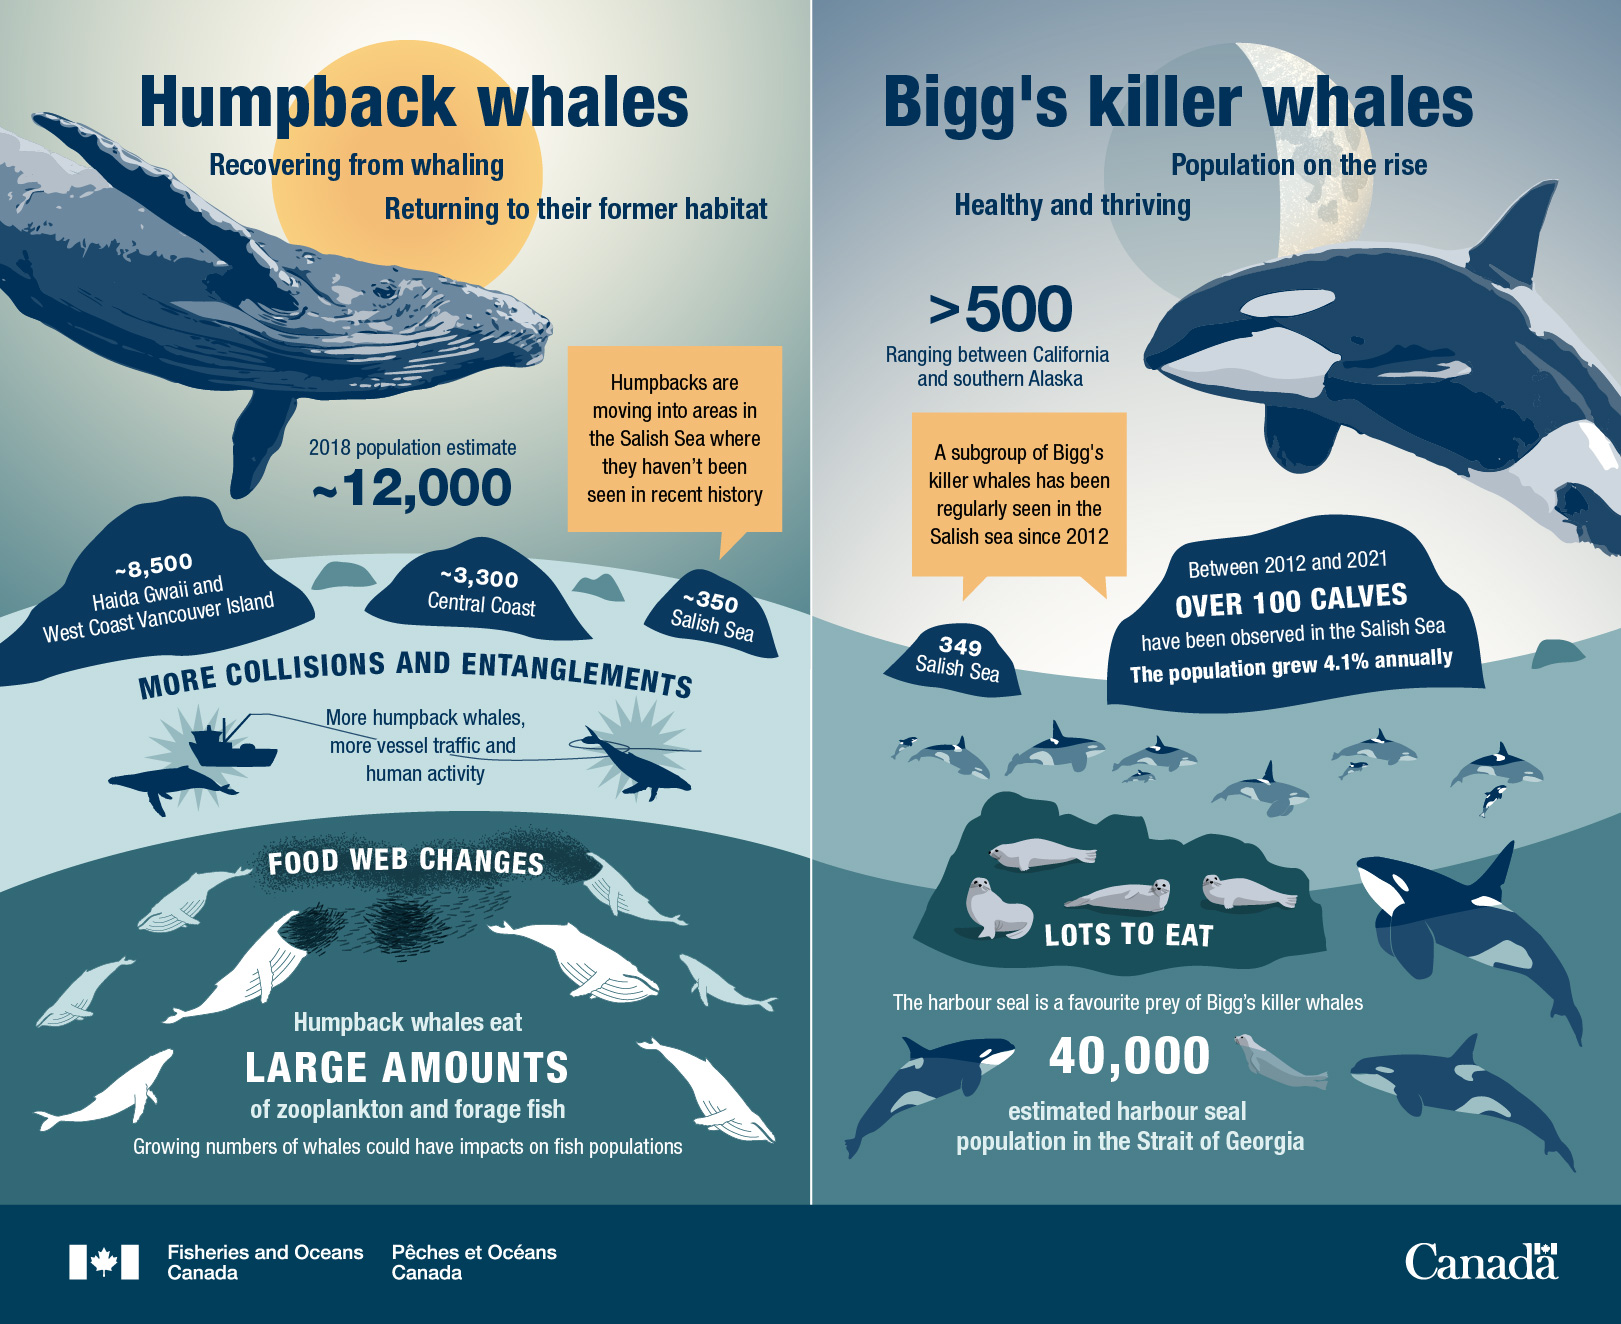 Humpback whales recovering, Bigg’s whales on the rise